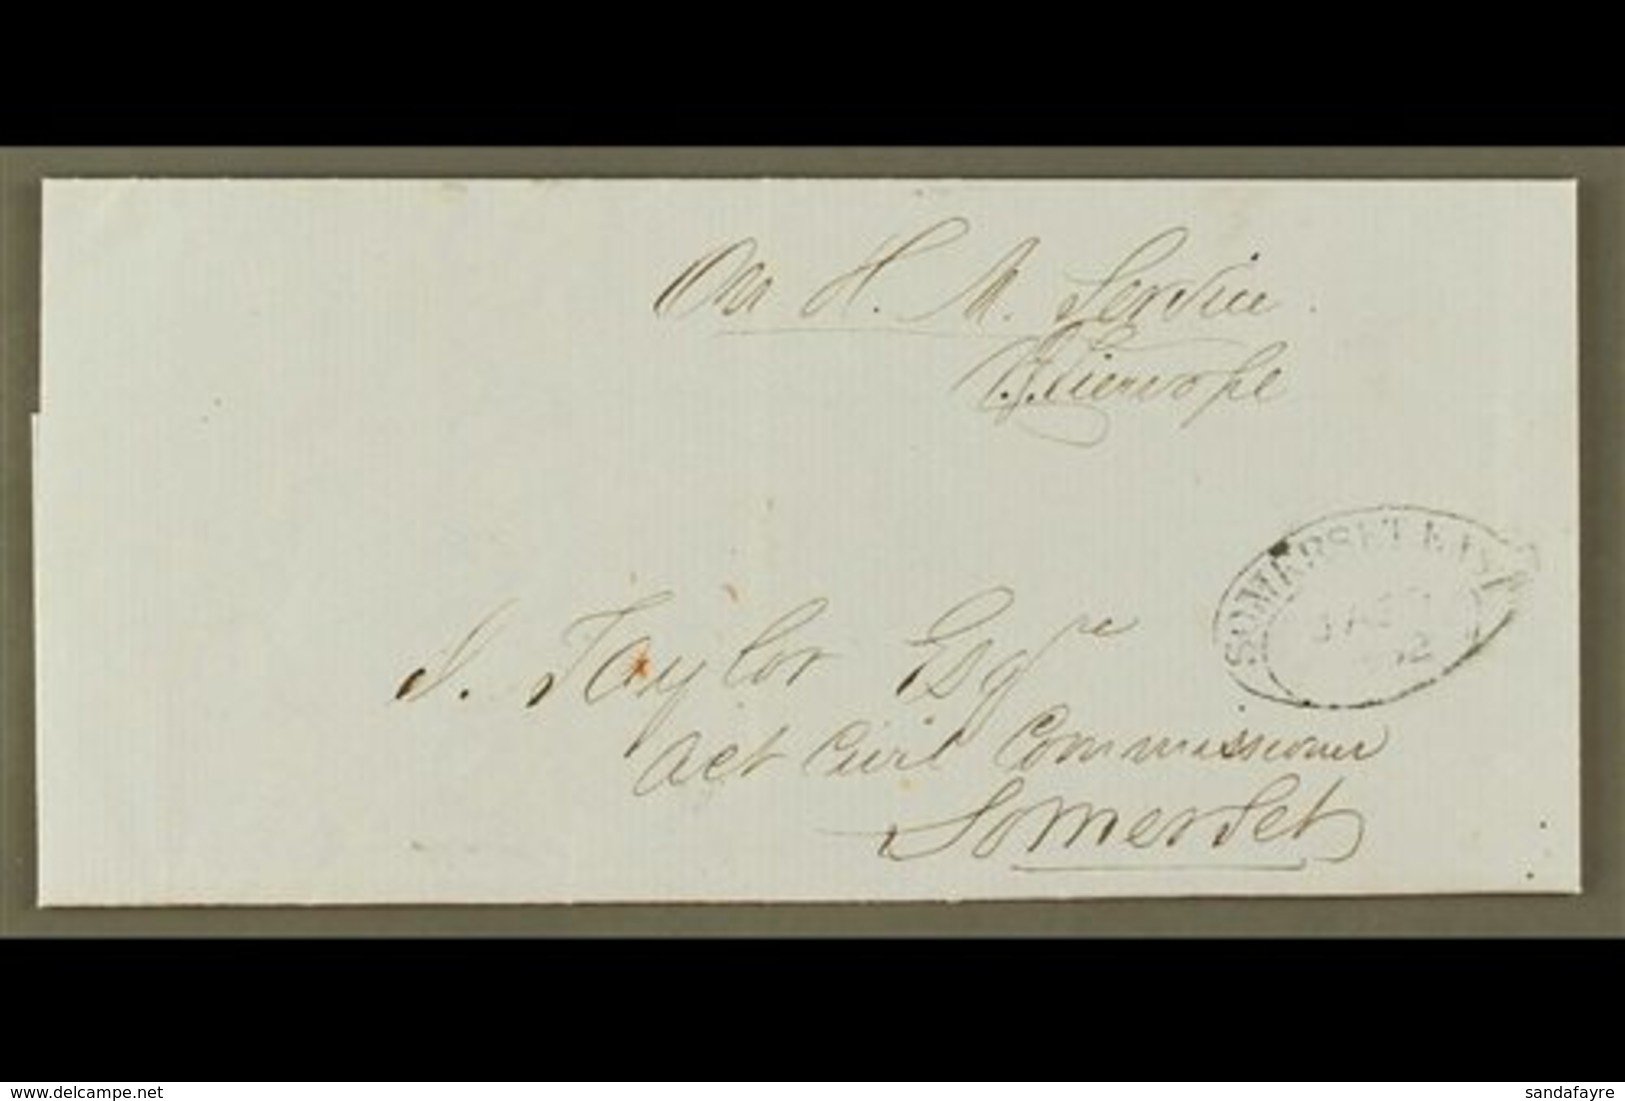 CAPE 1862 (29 Jan) Cover From Pearston To Somerset East, With Dated Oval Handstamp In Red On Reverse, Oval Arrival Mark, - Non Classés